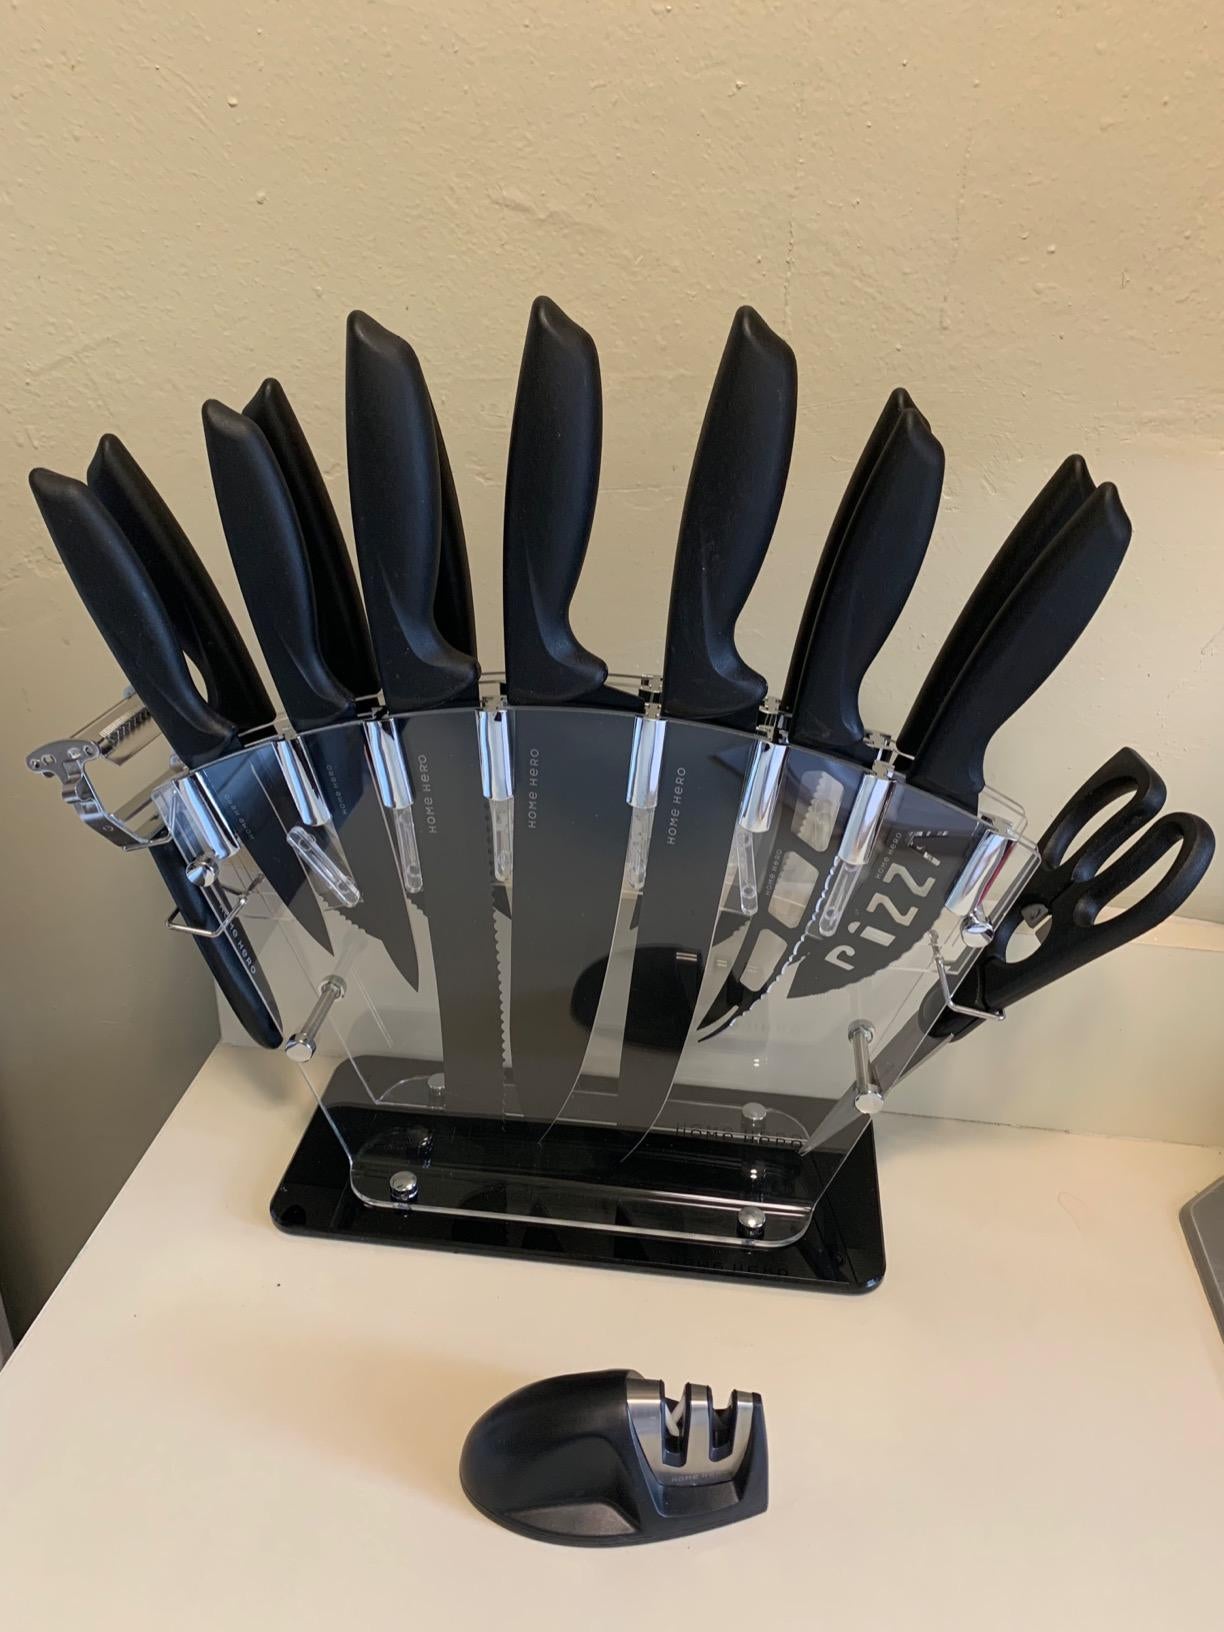 reviewer image of the knife set in its clear holder